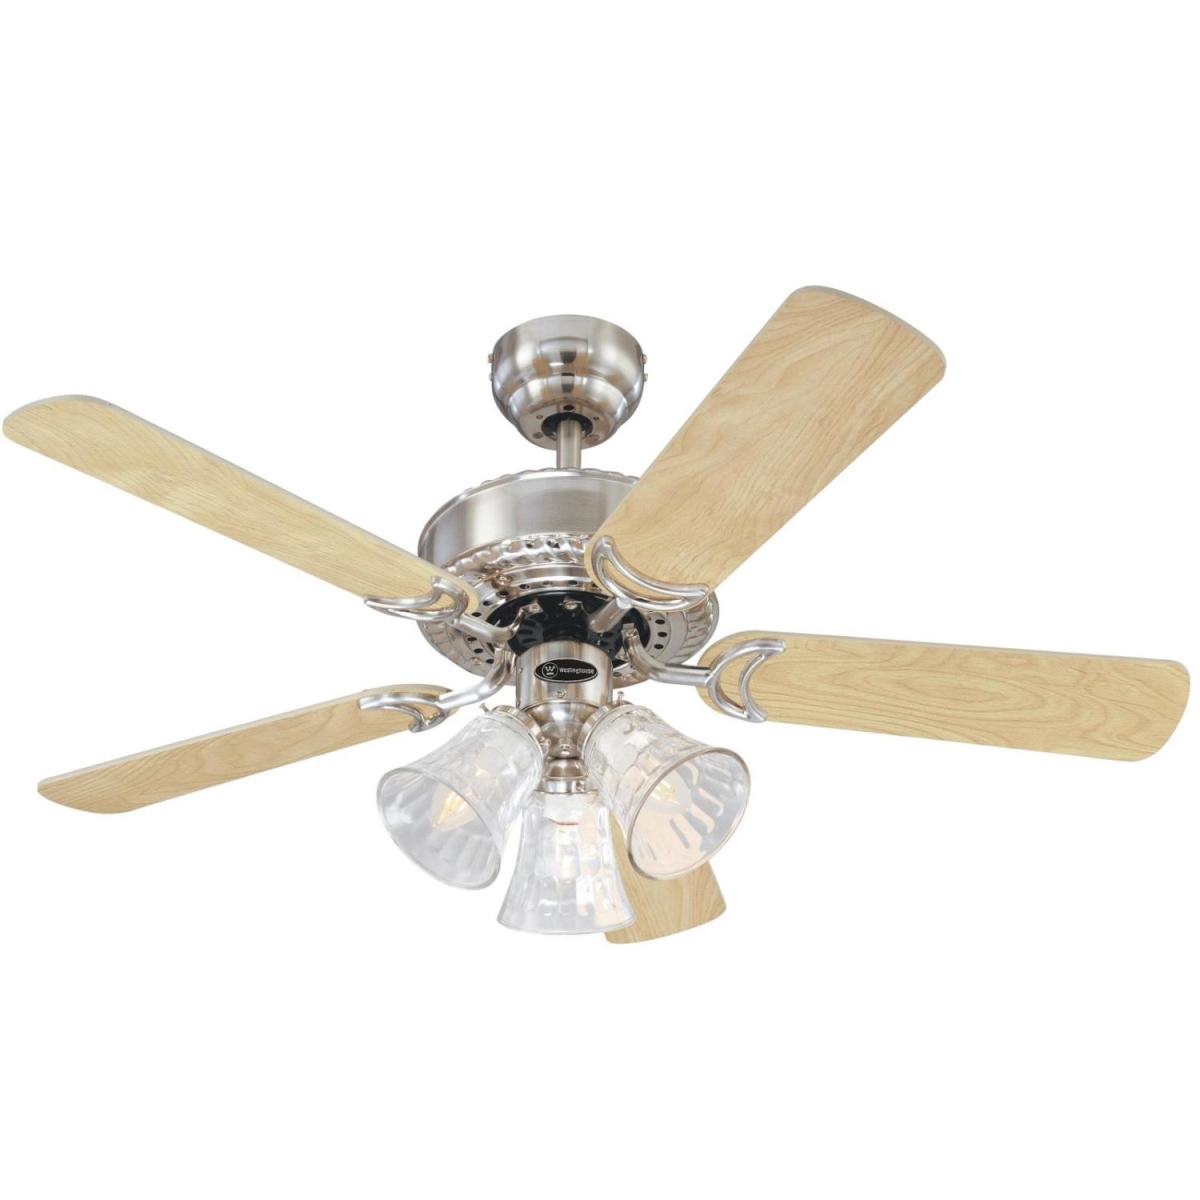 Picture of Westinghouse 7235400 42 in. Ceiling Fan with Dimmable LED Light Fixture Brushed Nickel Finish Reversible Blades Light Maple & Birds Eye Maple Water Glass Shades